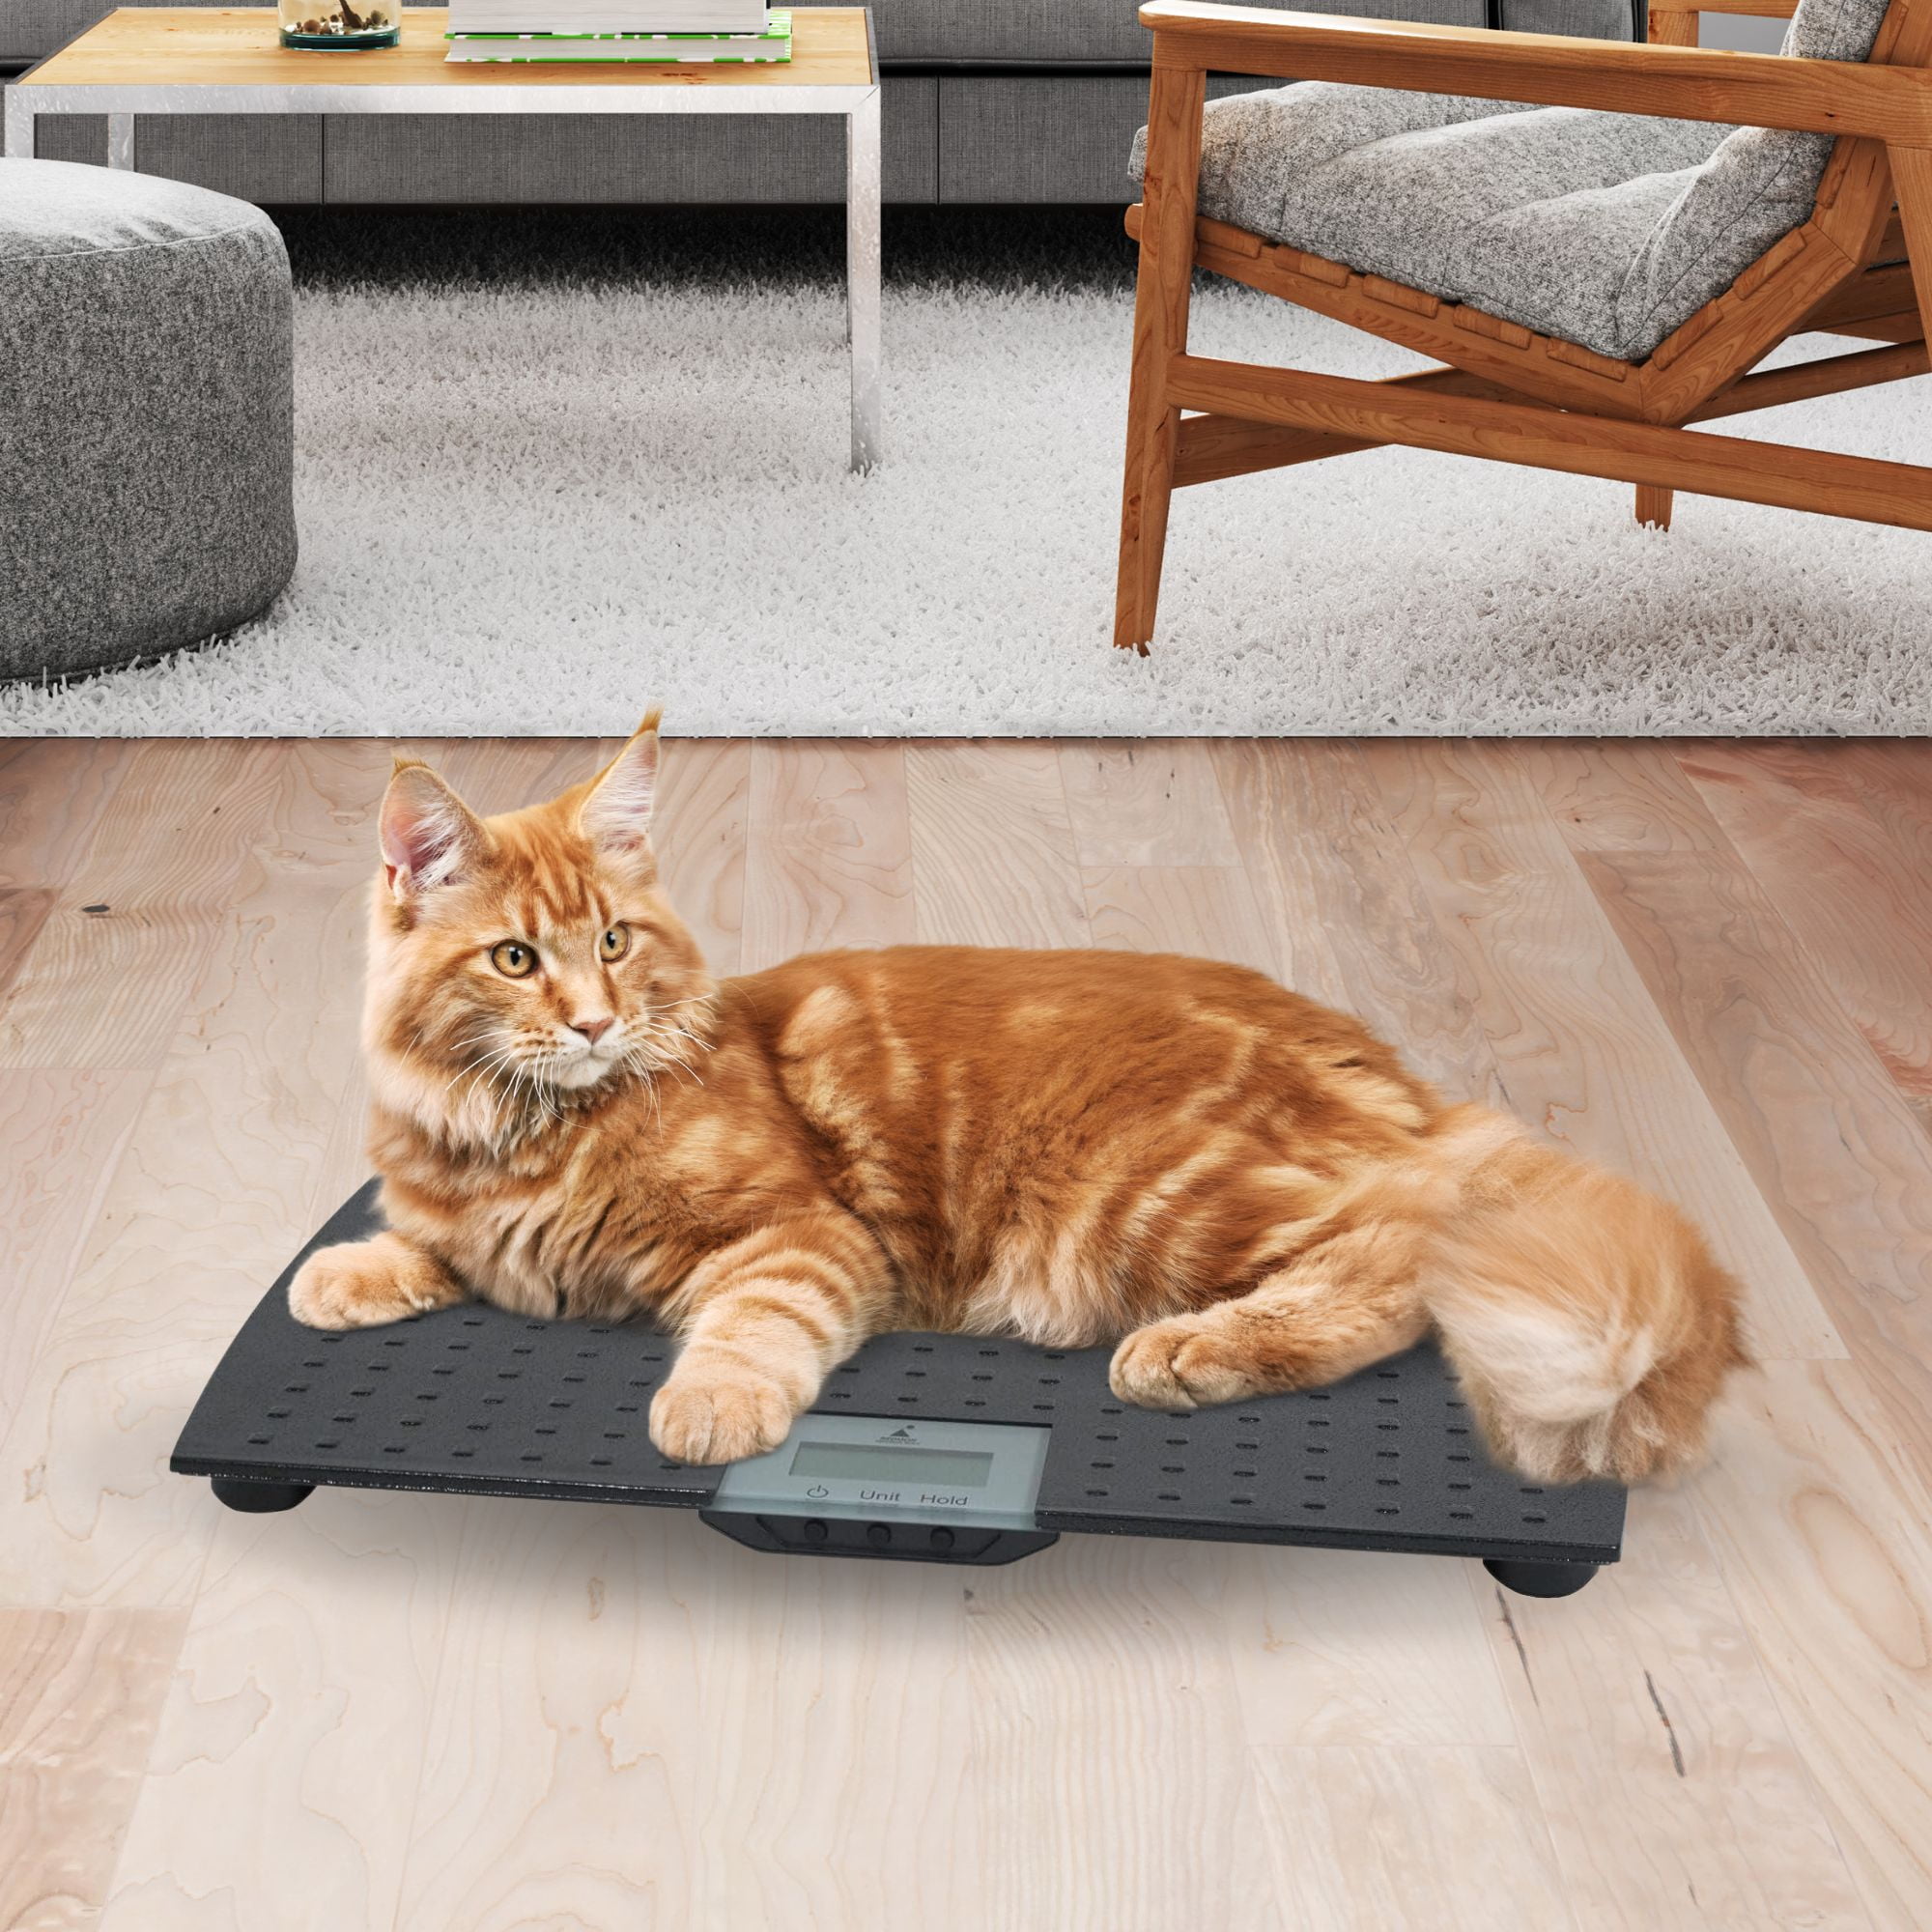 1100 Lbs Large Digital Pet Scale Cat Dog Animal Scale Stainless